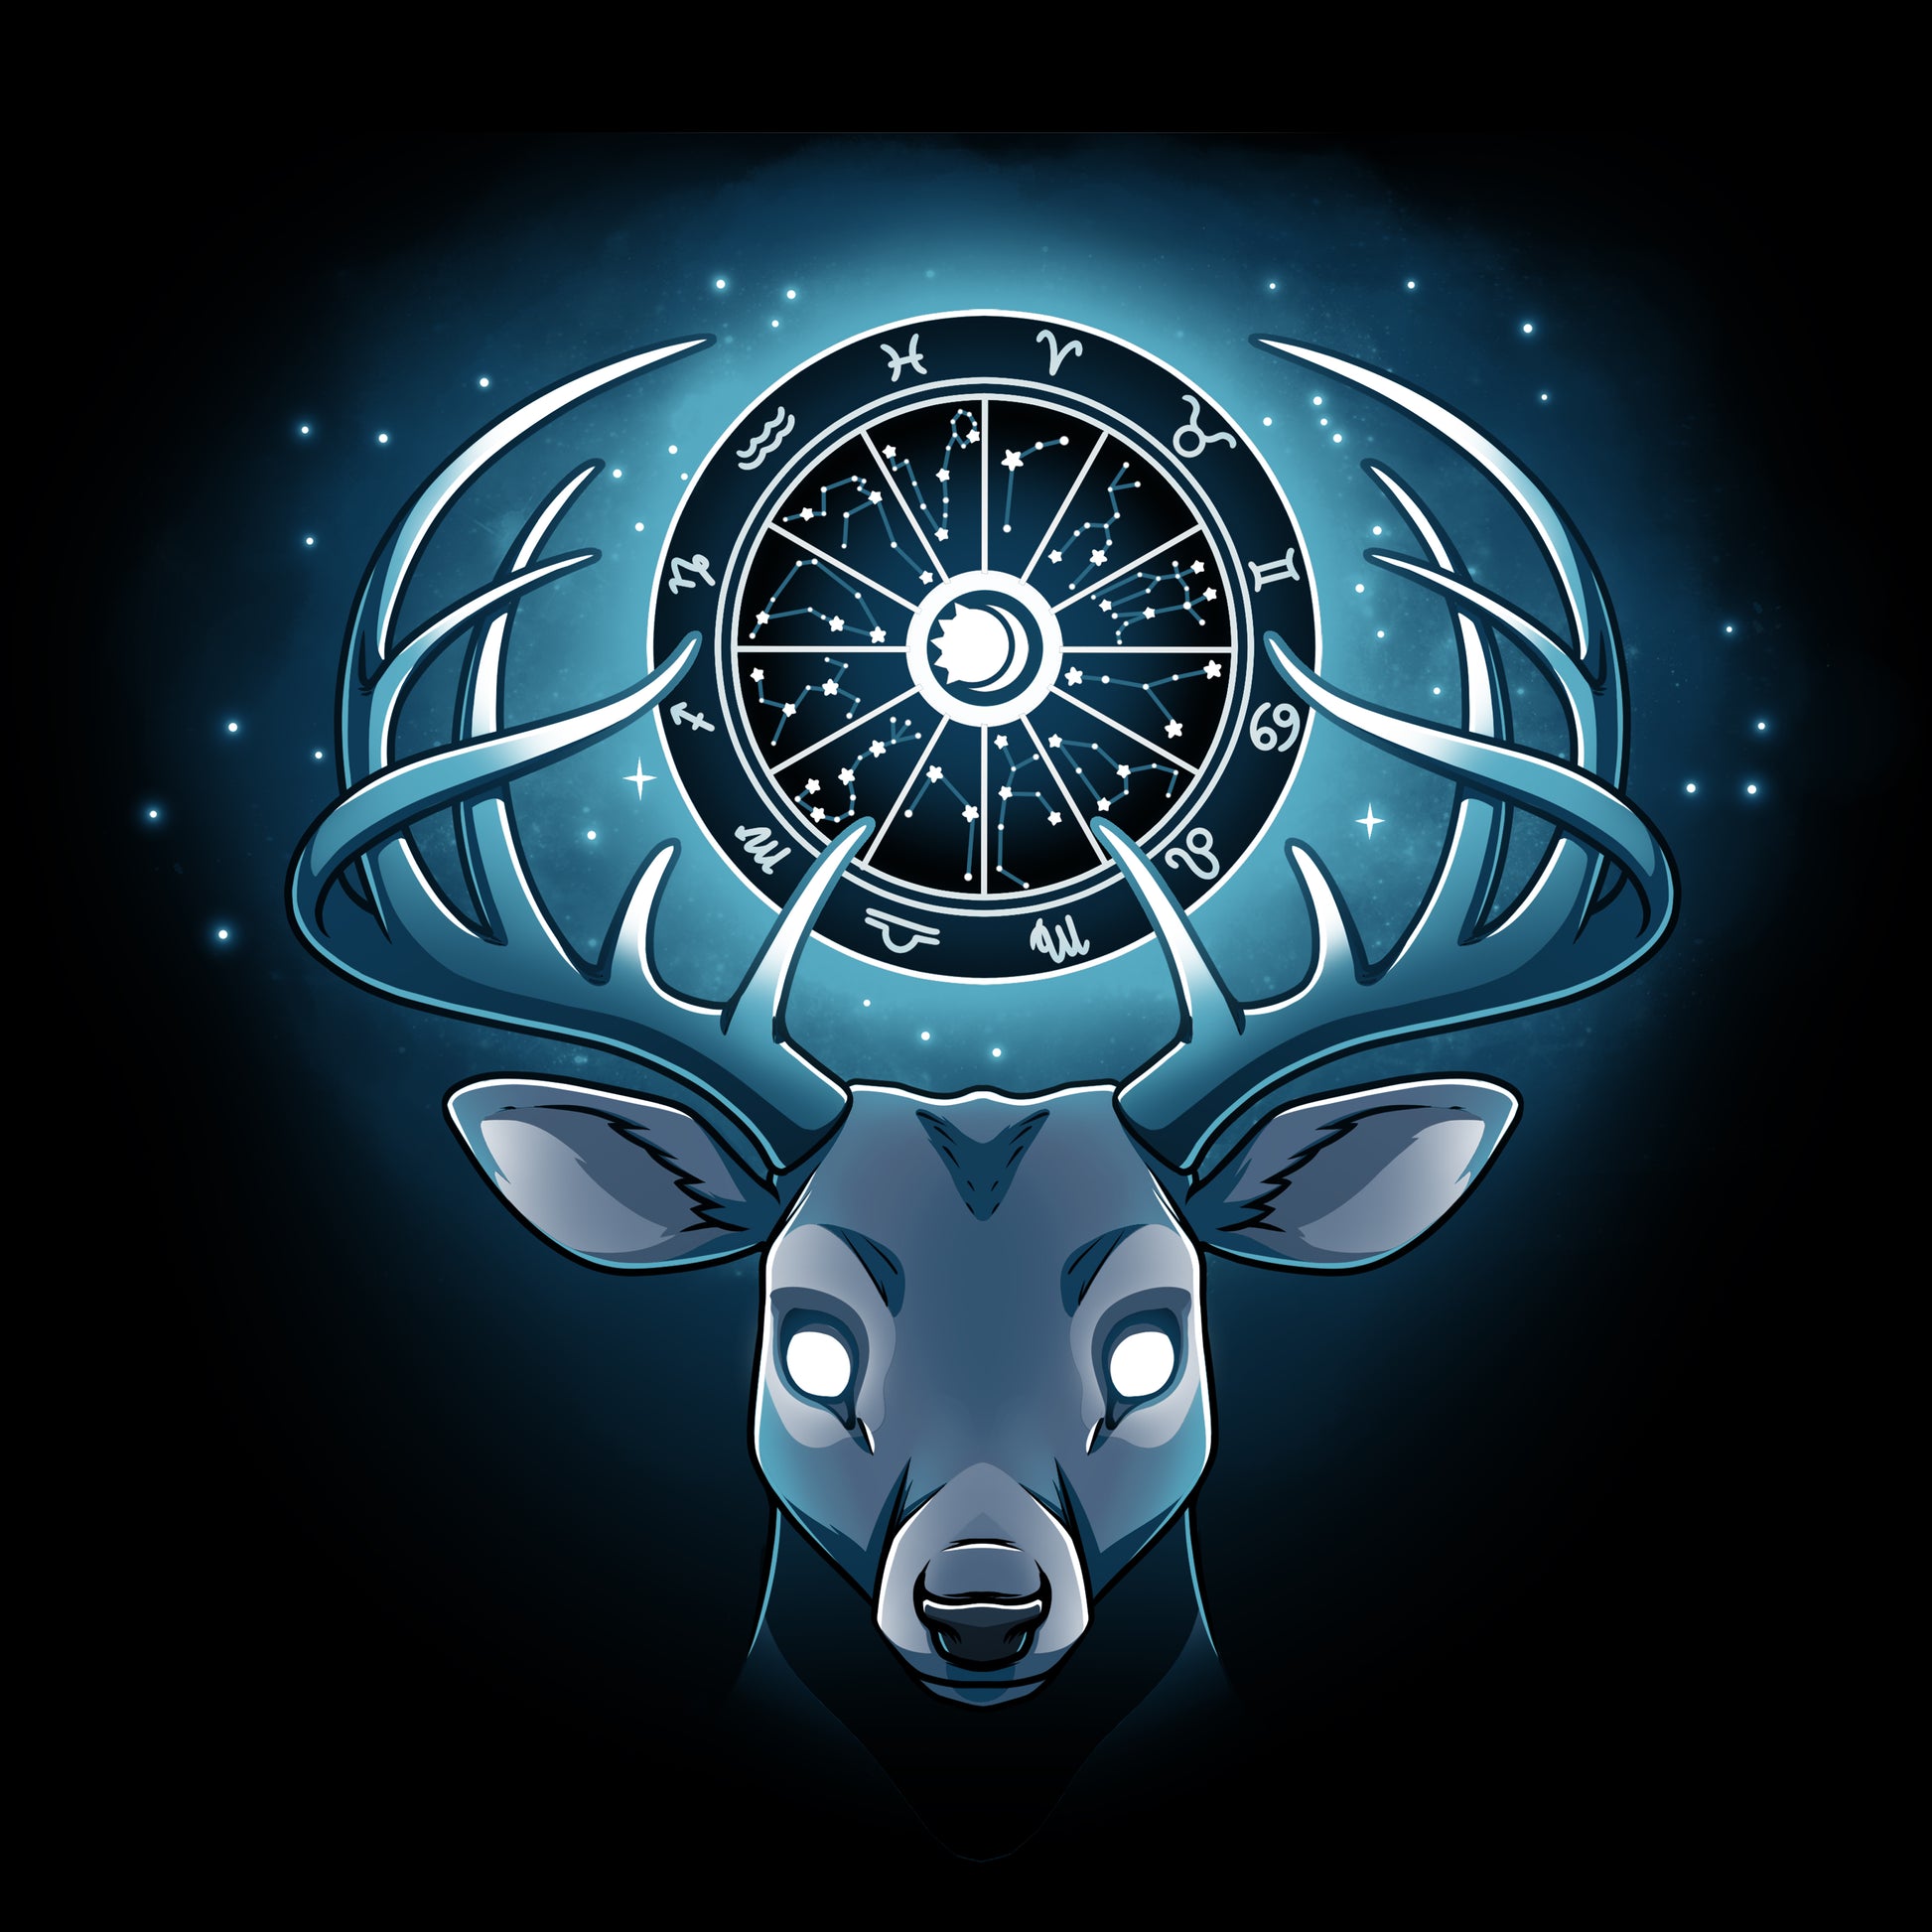 An Astrological Stag T-shirt featuring a deer head adorned with a compass and stars, made with comfortable ringspun fabric by TeeTurtle.